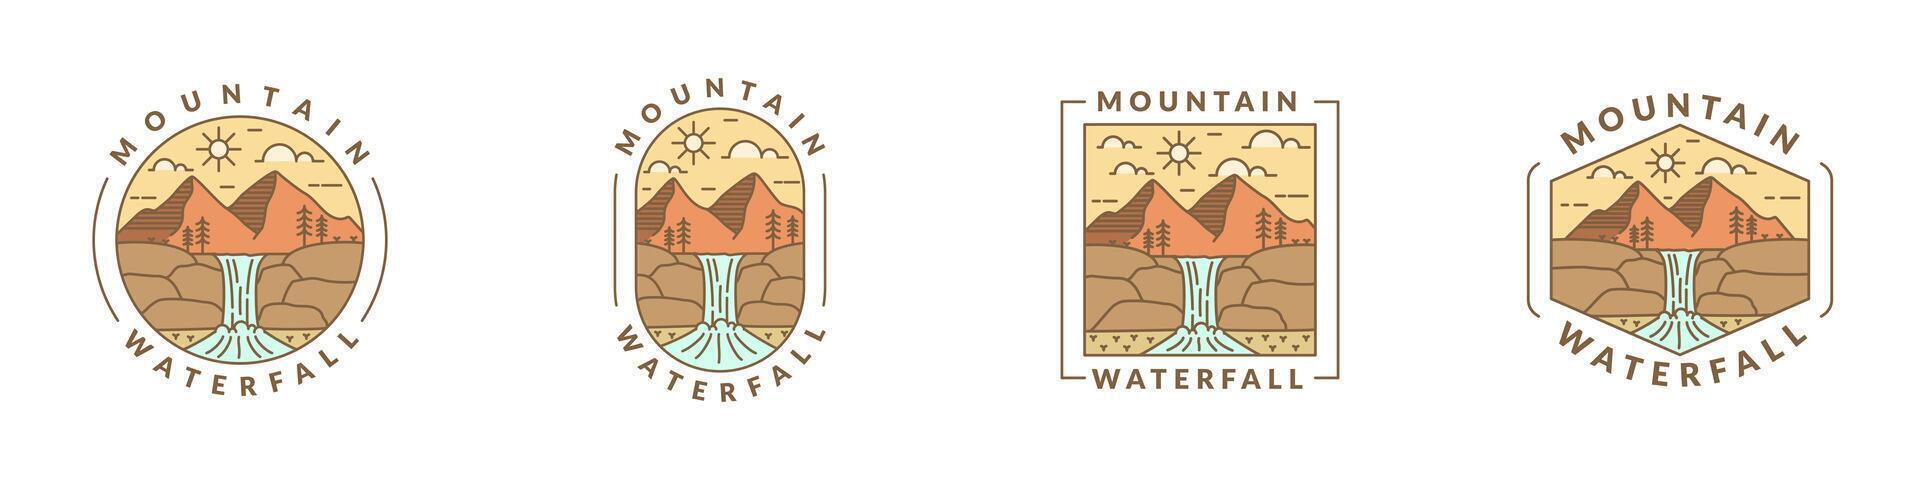 illustration of mountain and waterfall outdoor monoline or line art style vector